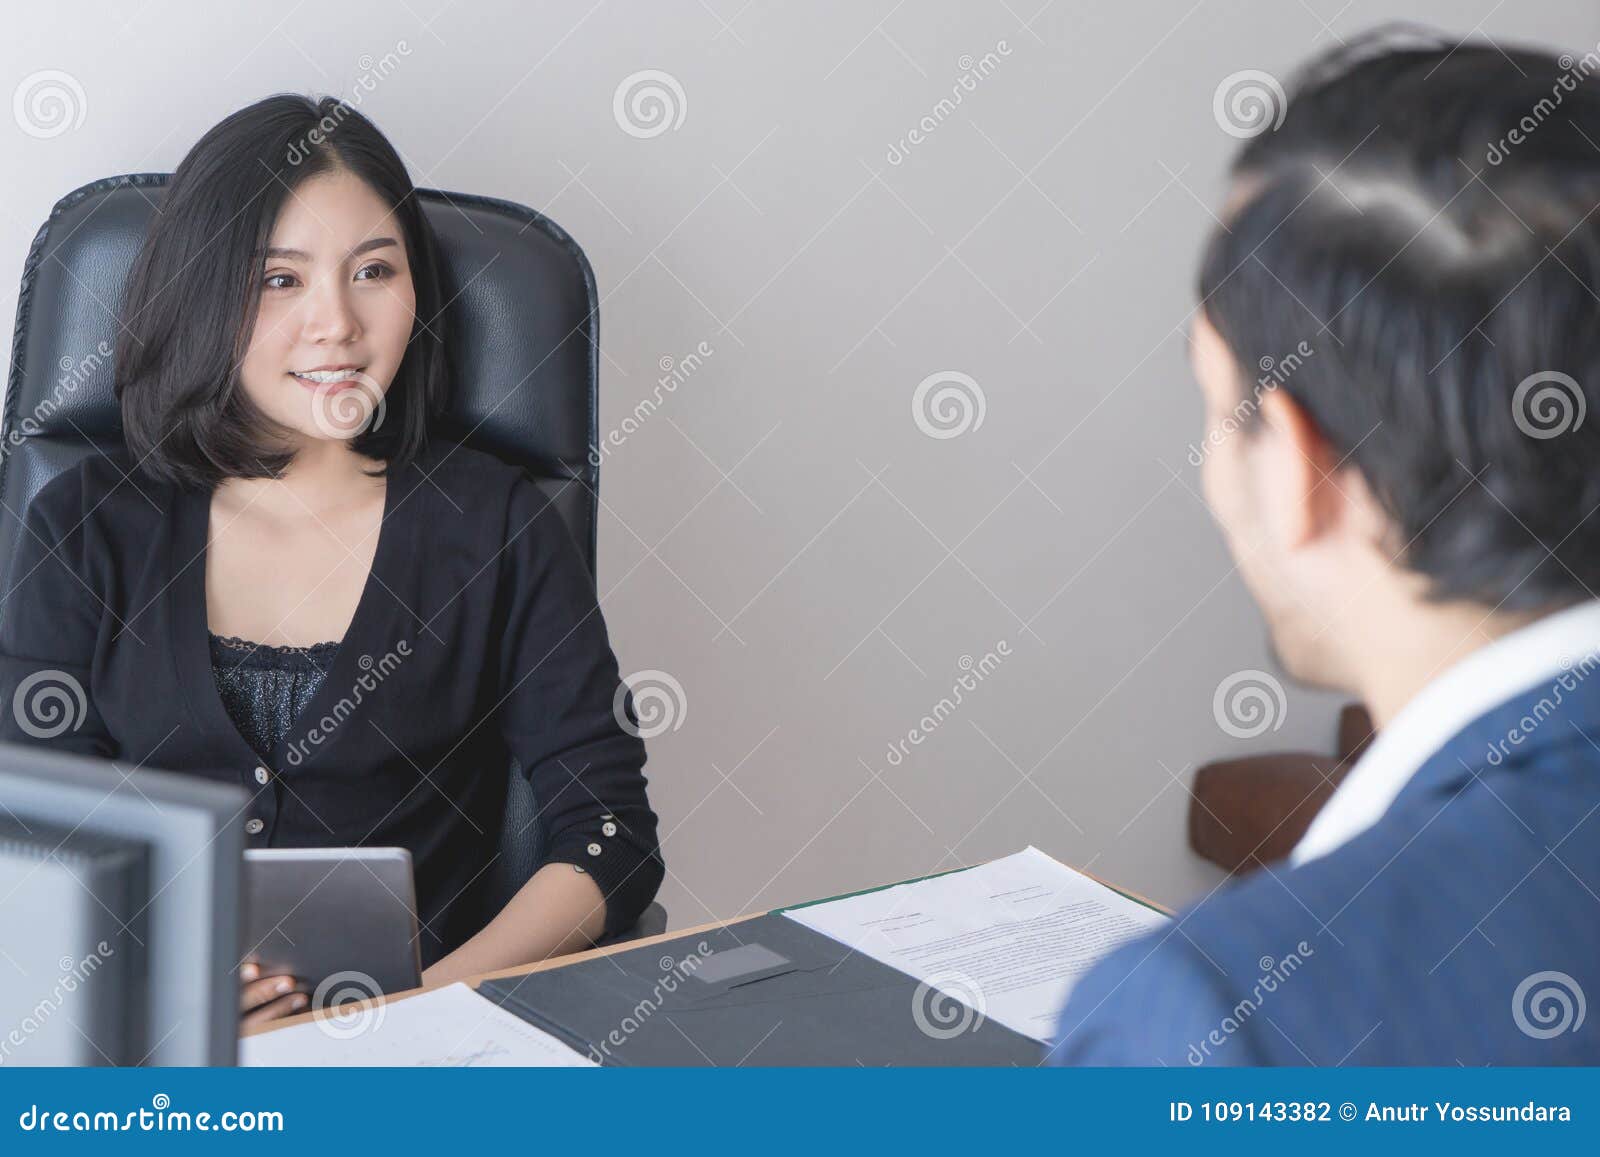 female supervisor interviewing a new male staff